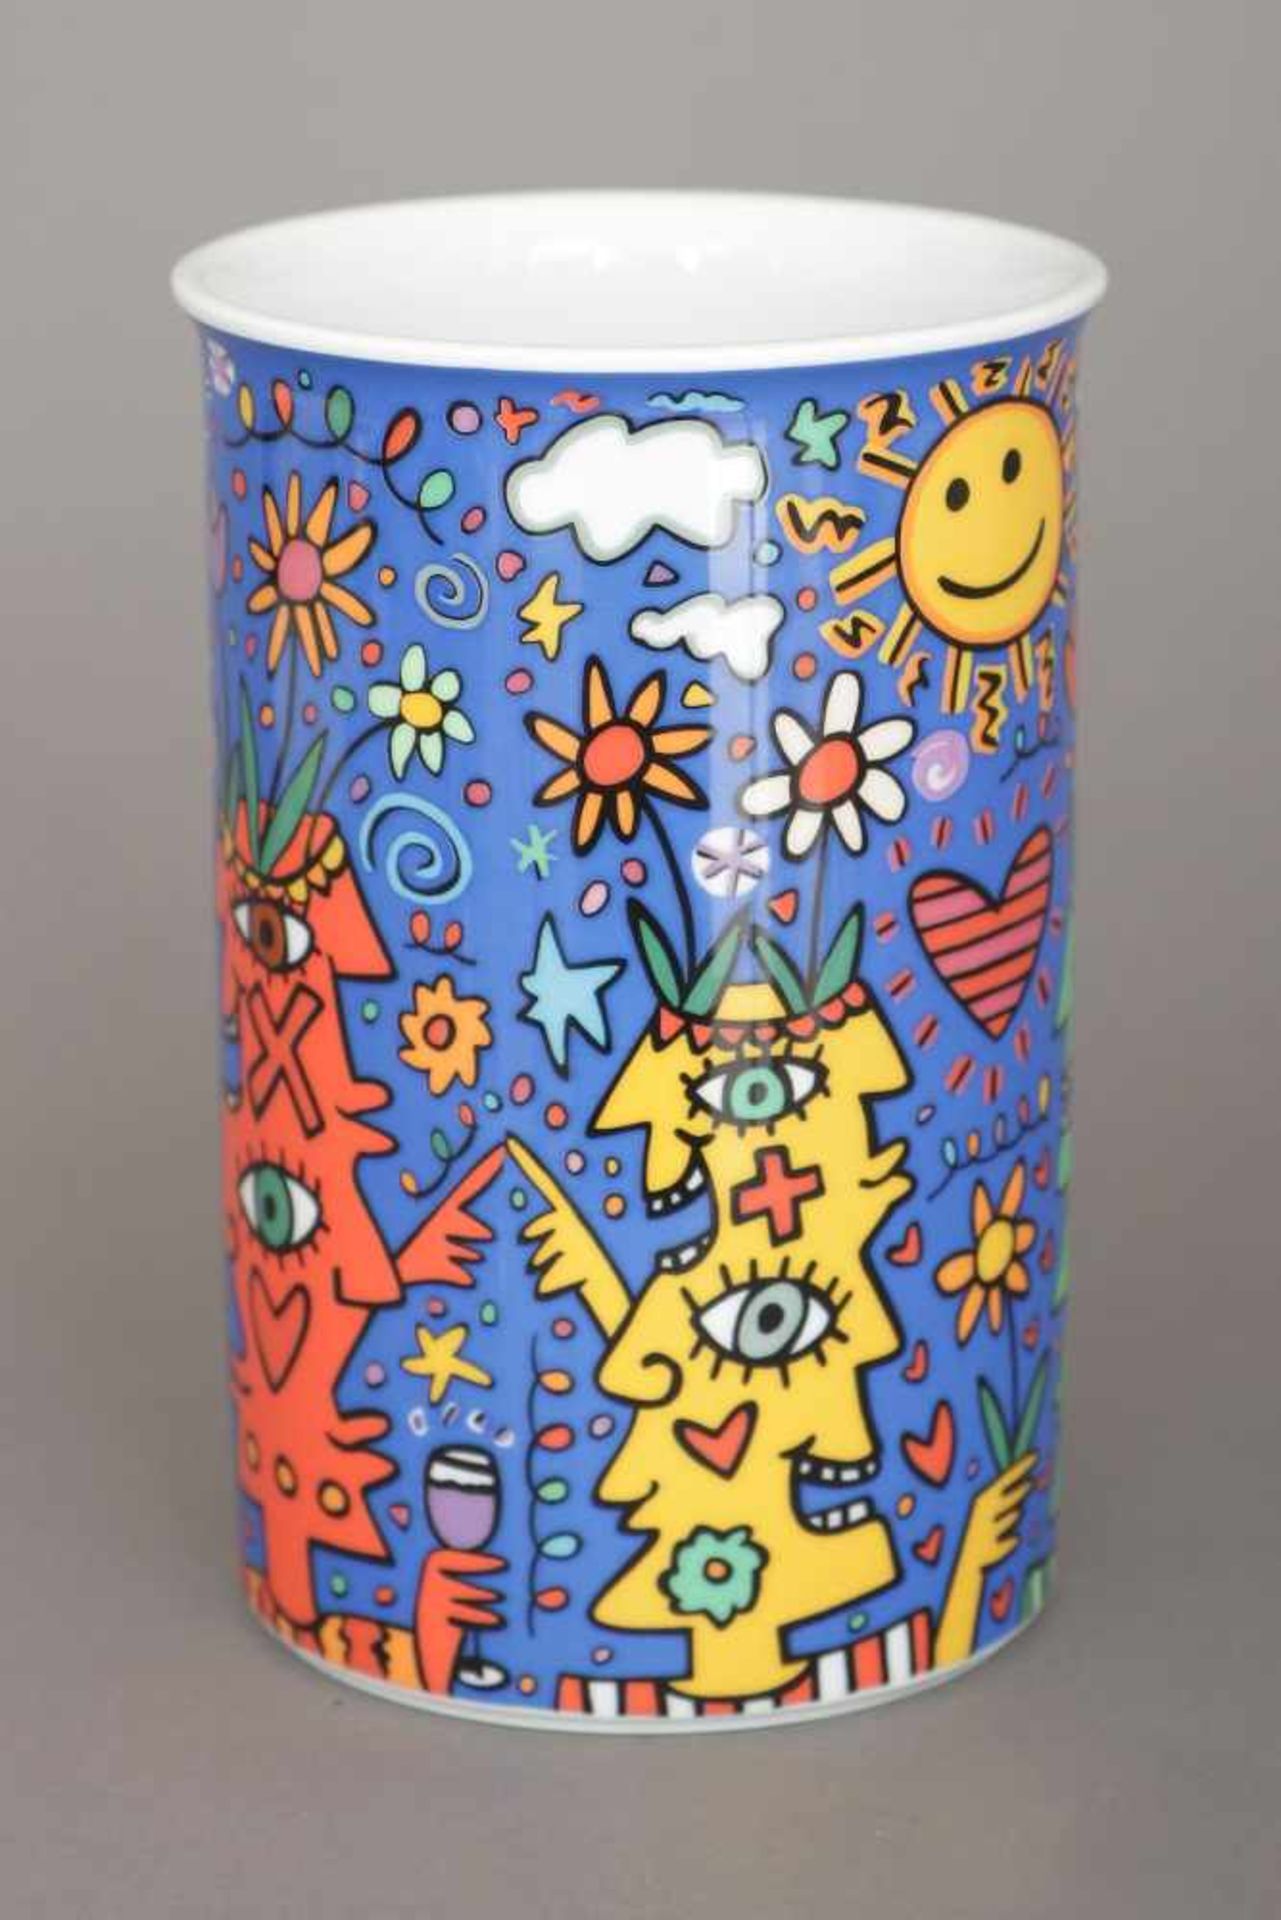 JAMES RIZZI (1950-2011) für ROSENTHAL (Studio line) Vase ¨Be here now¨Art Collection No. 1 (499er